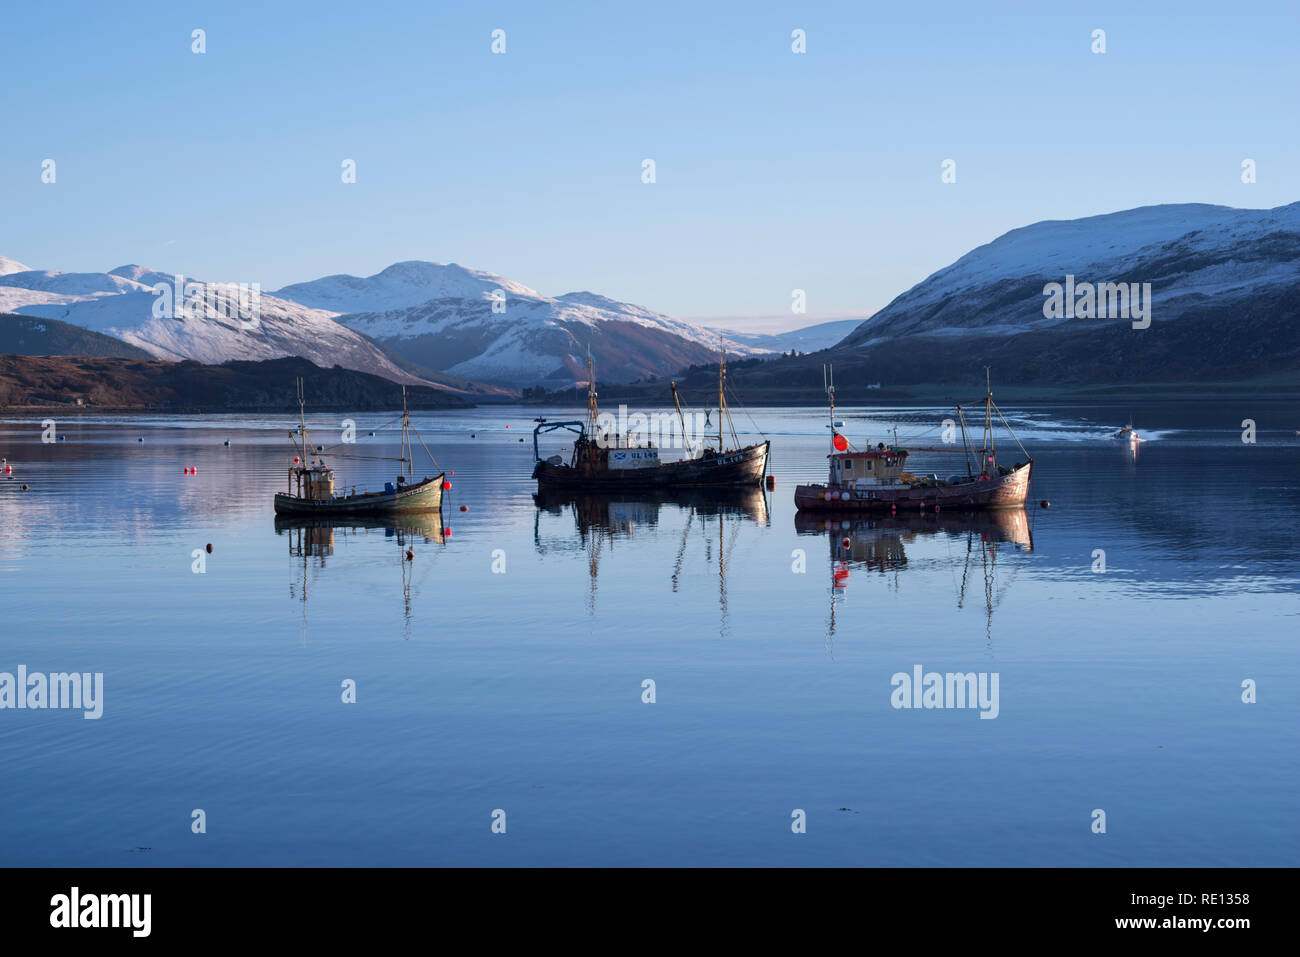 Fishing boats reflections moored in Loch Broom, Ullapool, with snowy winter mountains in the background Stock Photo